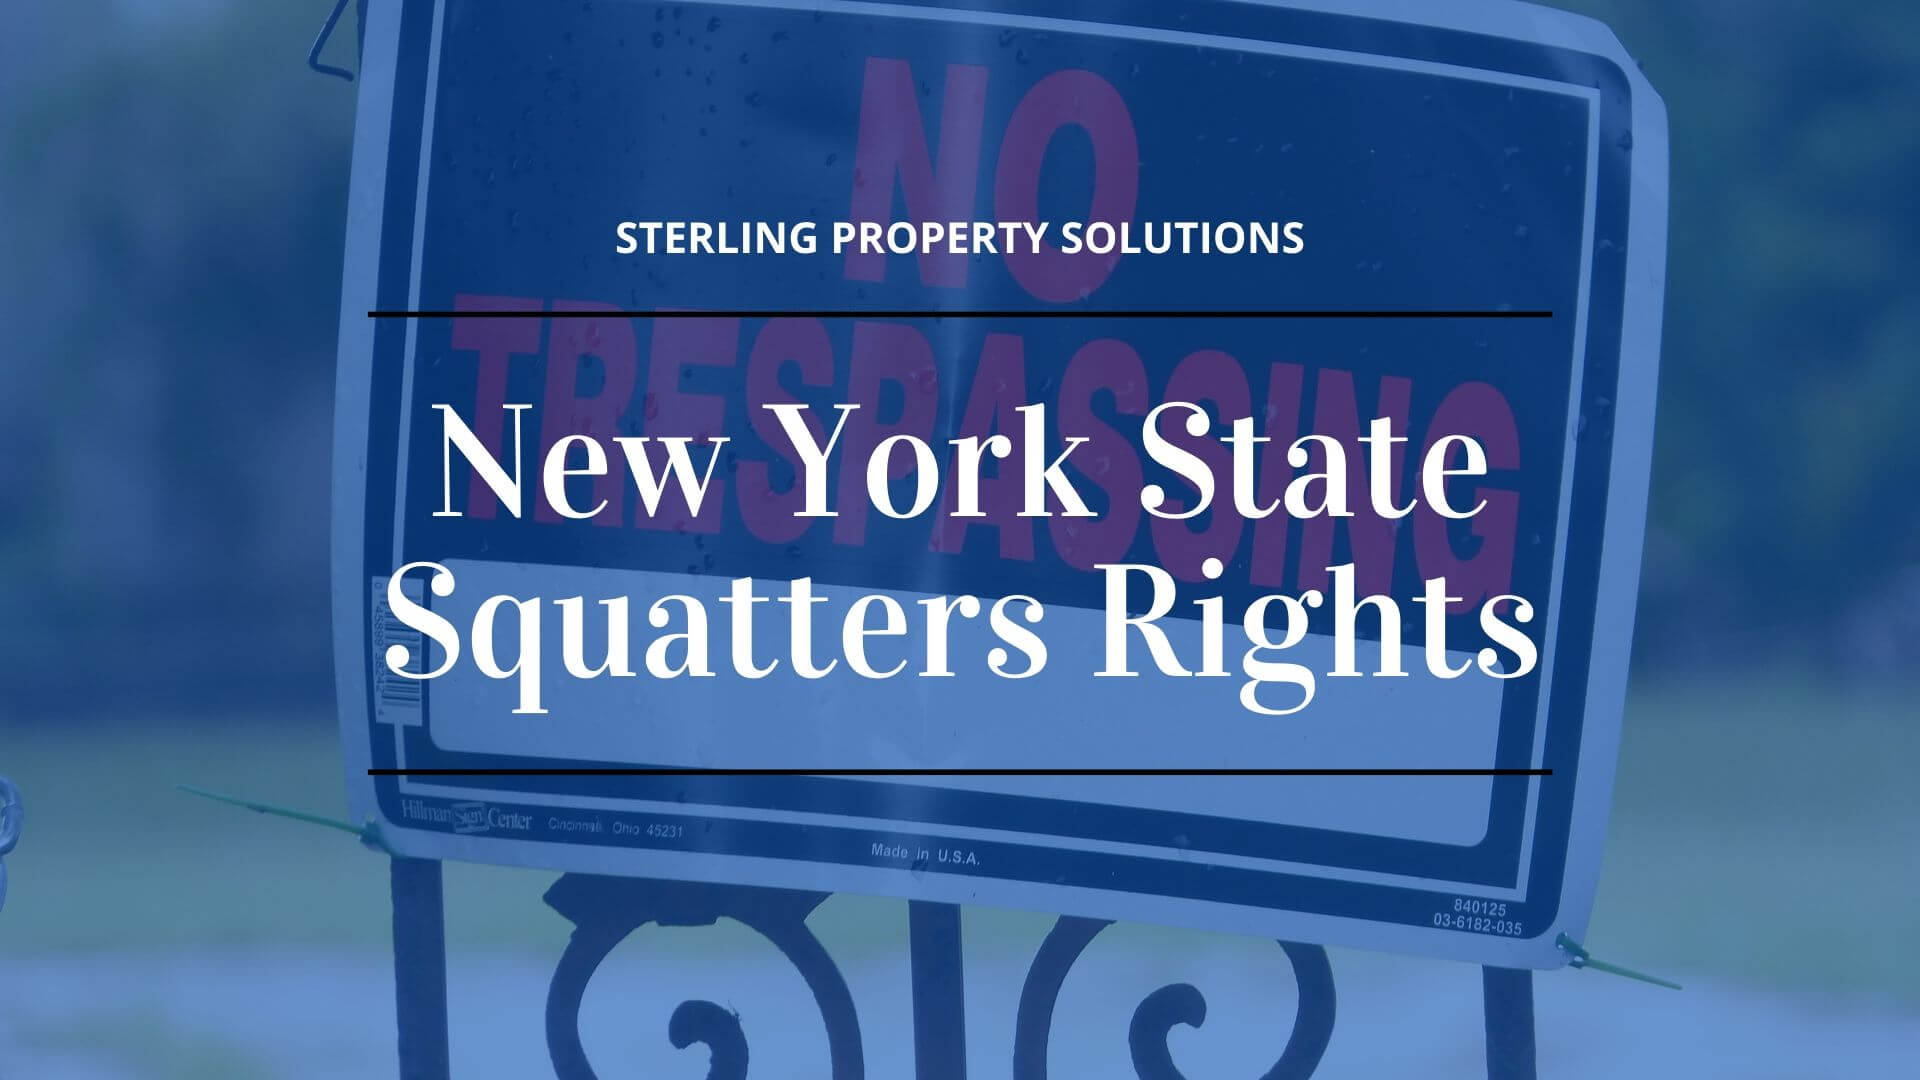 New York State Squatters Rights